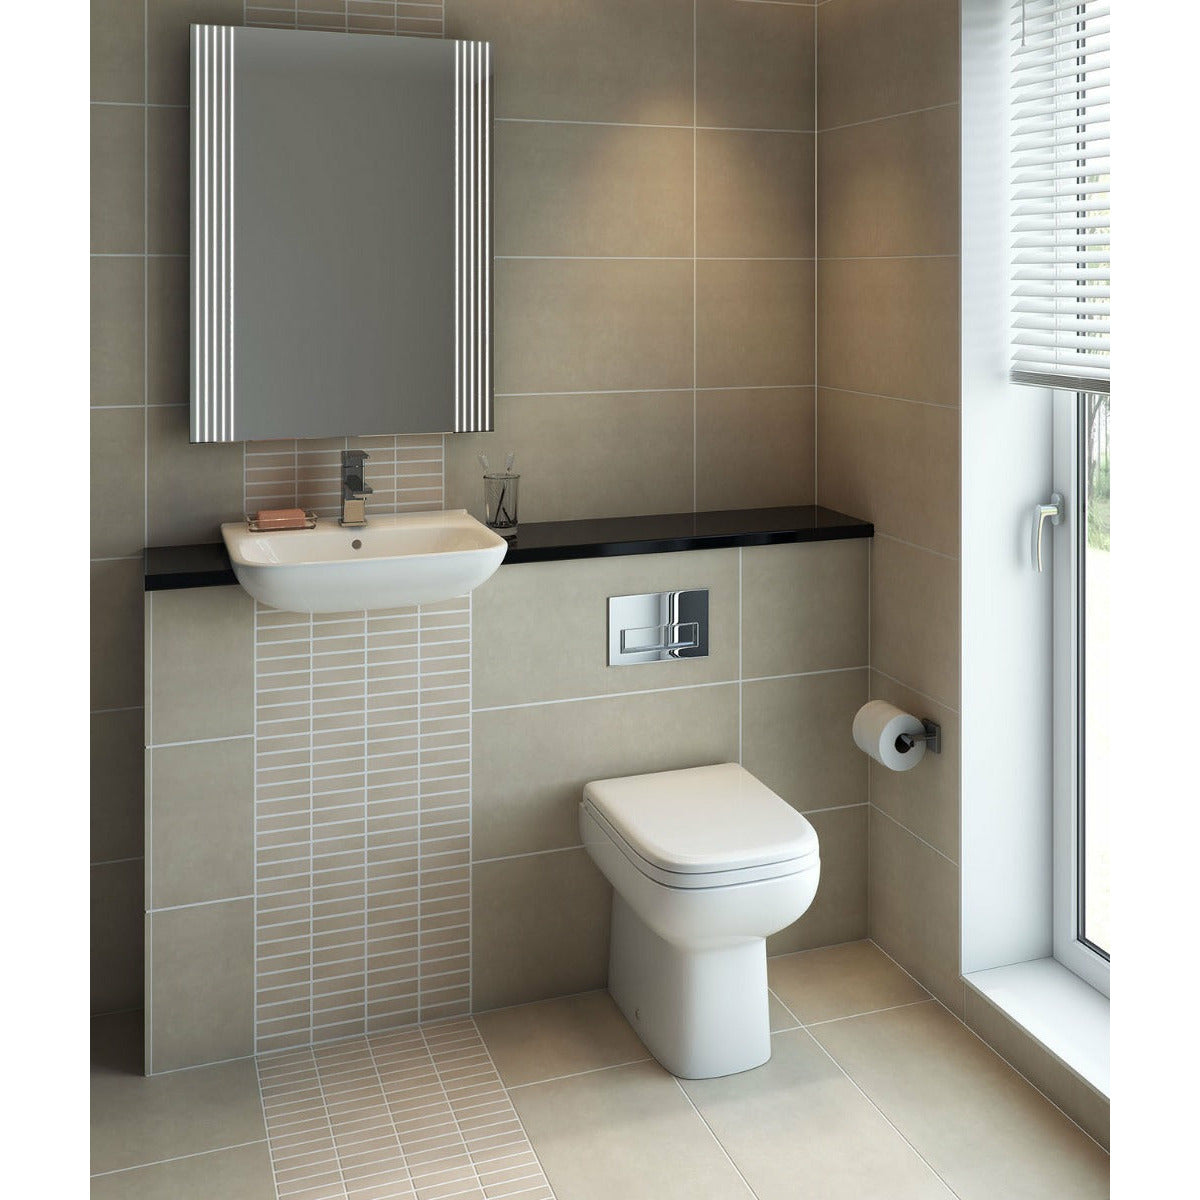 Frontline Origin 62 Back-to-Wall Toilet with Soft-Close Seat - Letta London - 